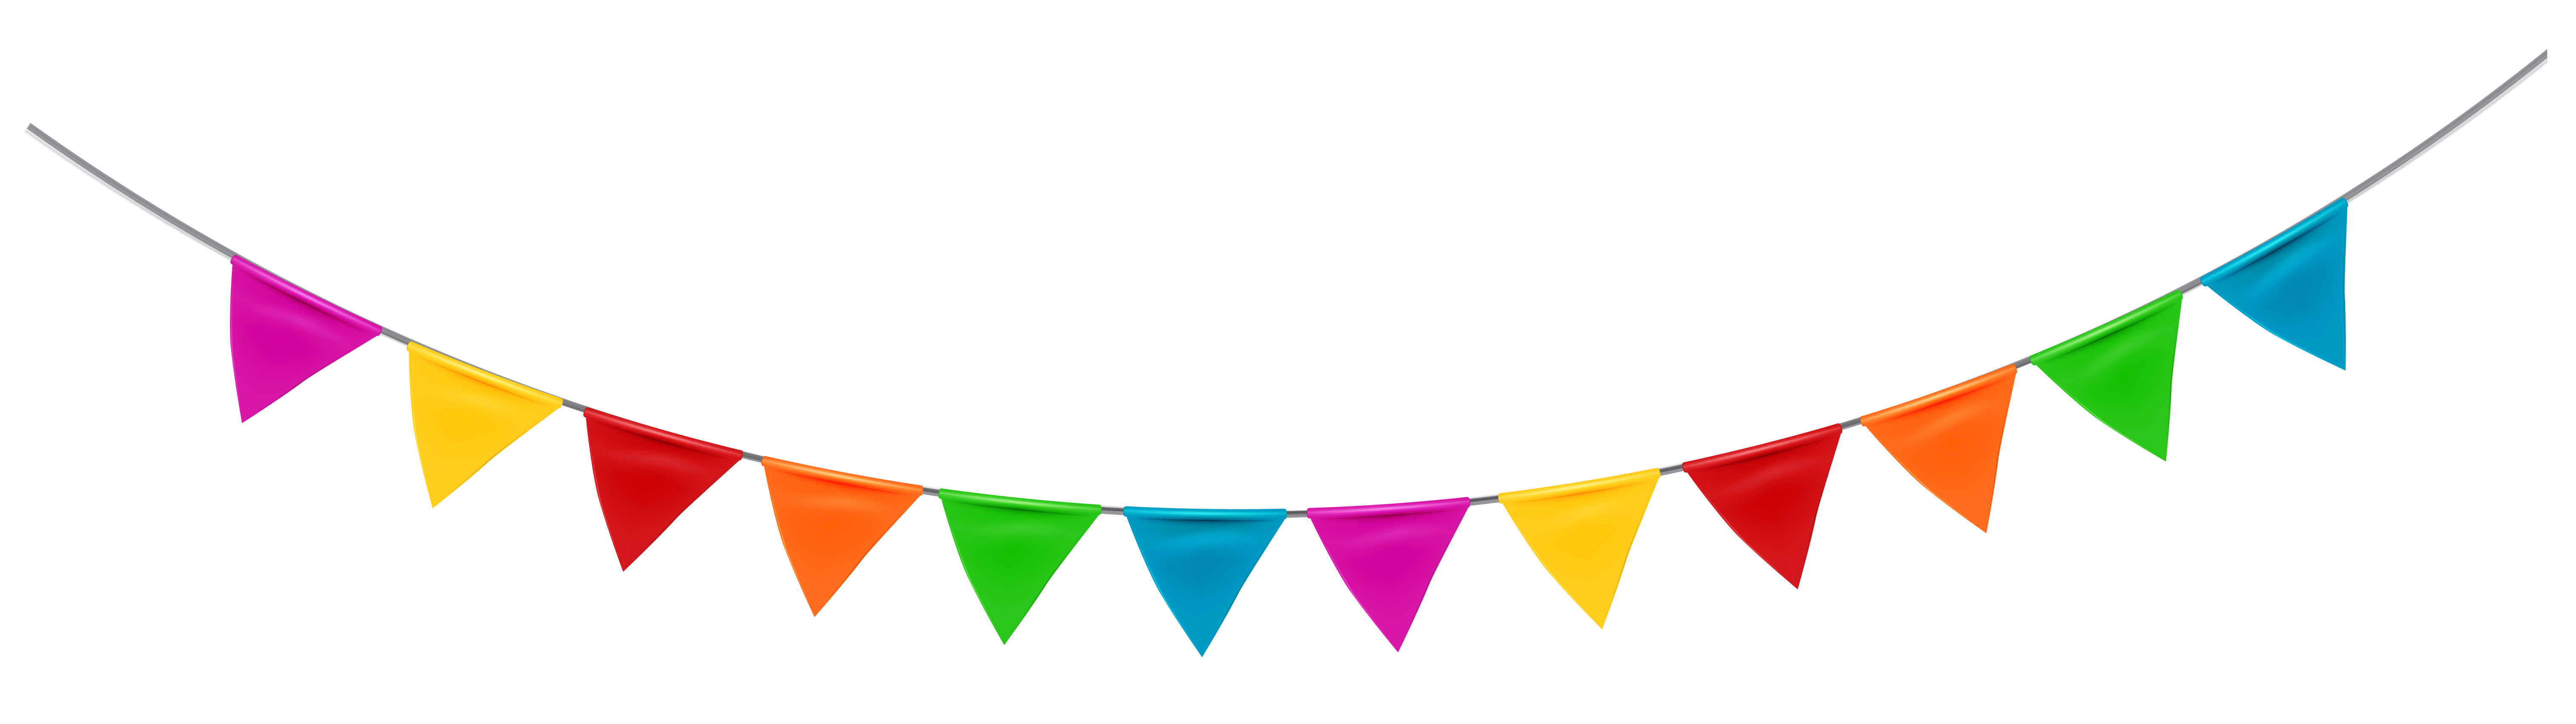 Party Flags Download PNG Image